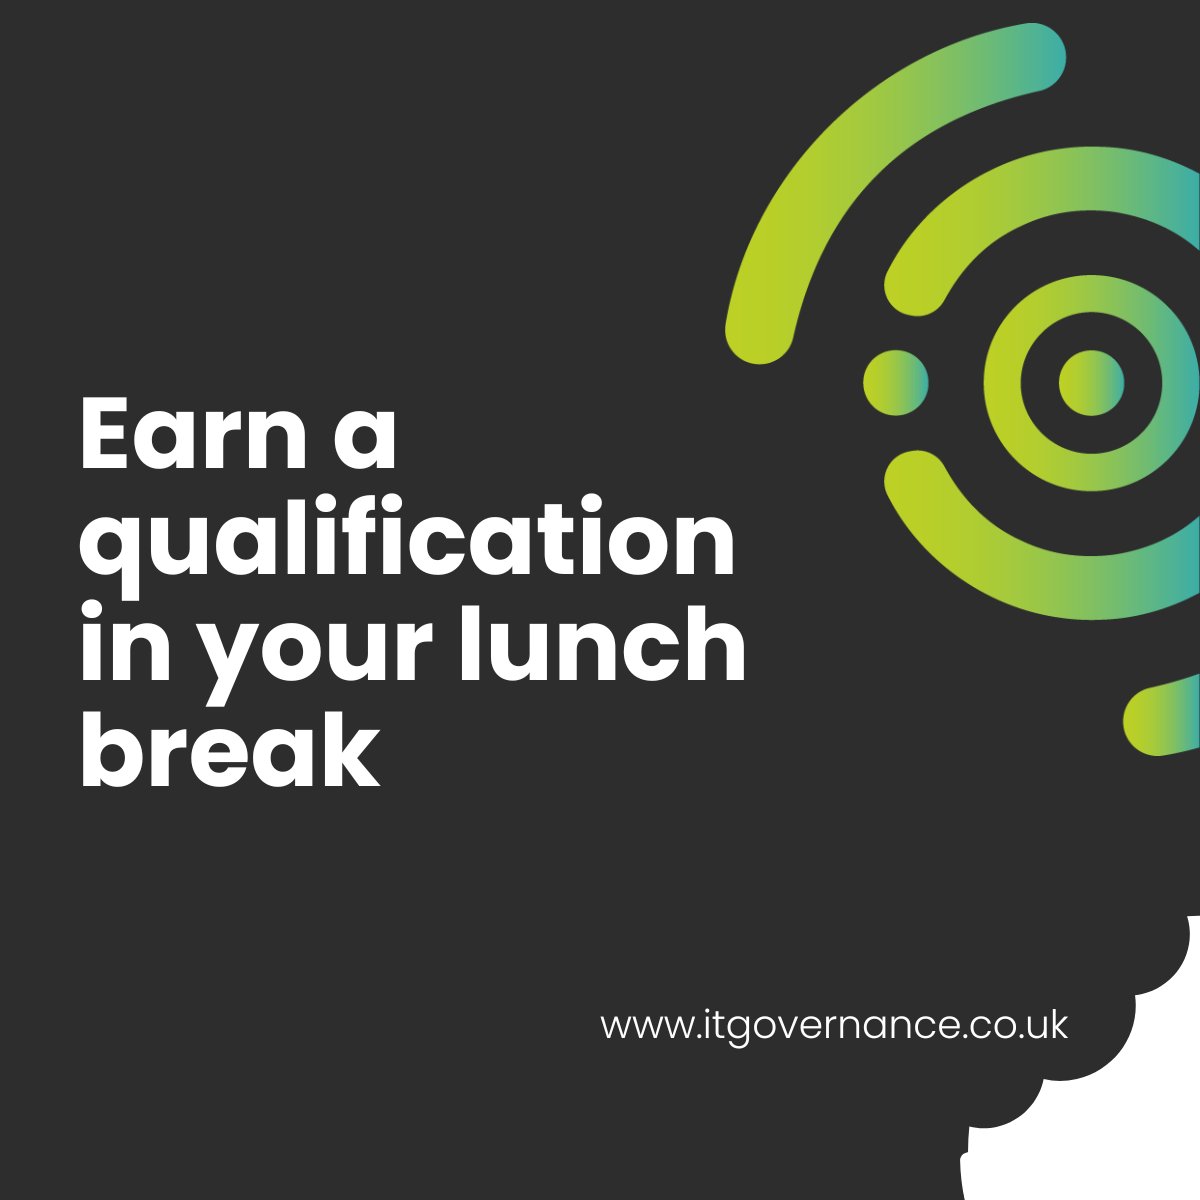 🎓🍔 Earn a qualification in your lunch break 🍔🎓 Book now to save 10% on selected Foundation training courses 👉ow.ly/GSxL50Rofwy #ProfessionalQualification #SelfPacedLearning #IBITGQ #CISF #GDPRF